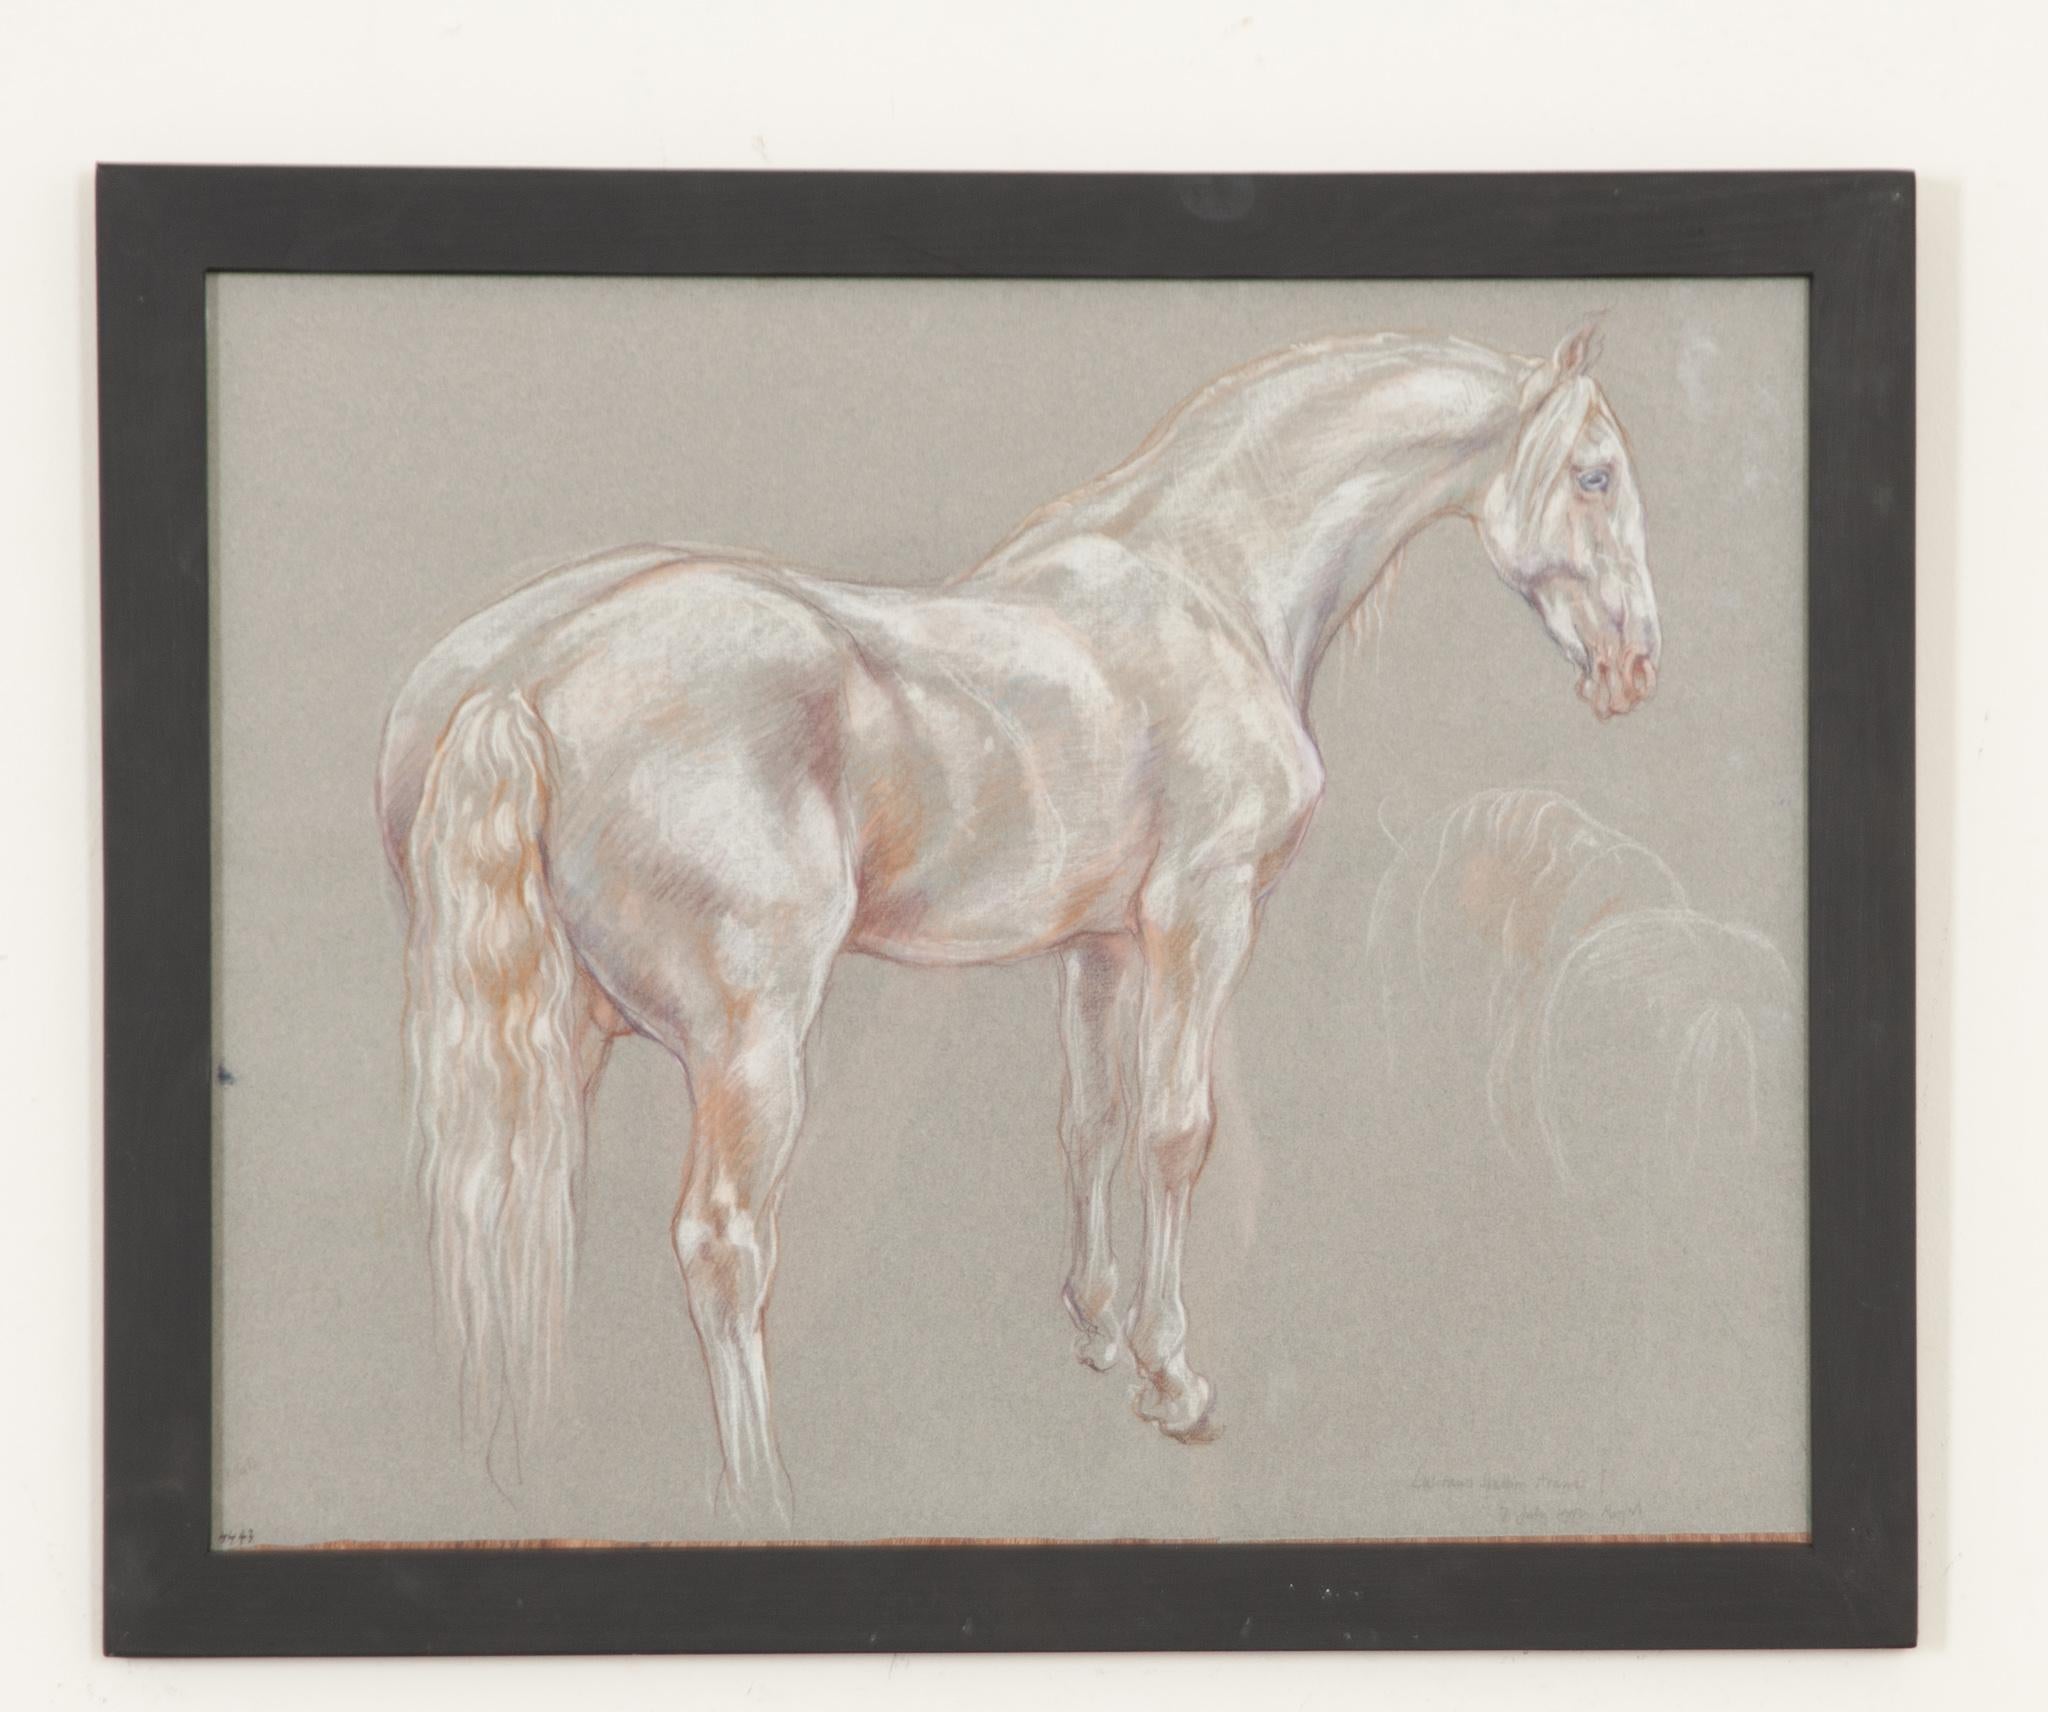 A beautiful piece from a larger collection of framed 20th century show horse drawings by Royal Academy artist Leslie Charlotte Benenson (1941-2018). A pastel study of exceptional quality on charcoal paper. Notes from the artist are at the bottom of